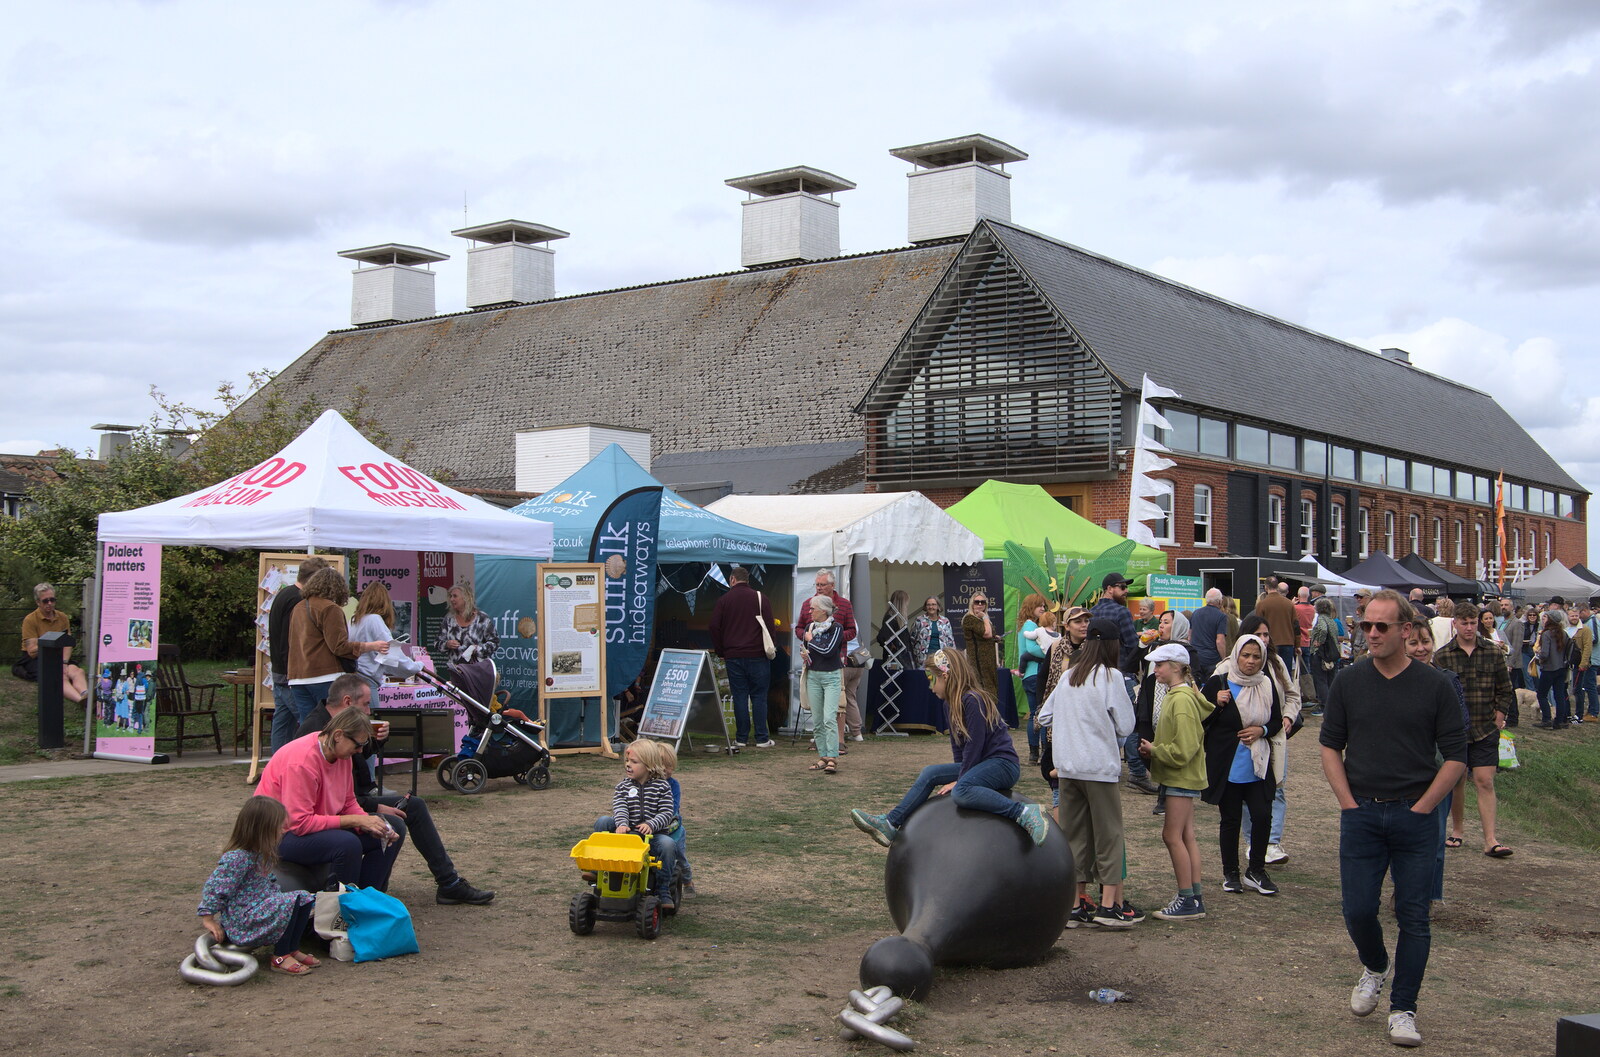 Food stalls by Snape Maltings from The Aldeburgh Food Festival, Snape Maltings, Suffolk - 25th September 2022